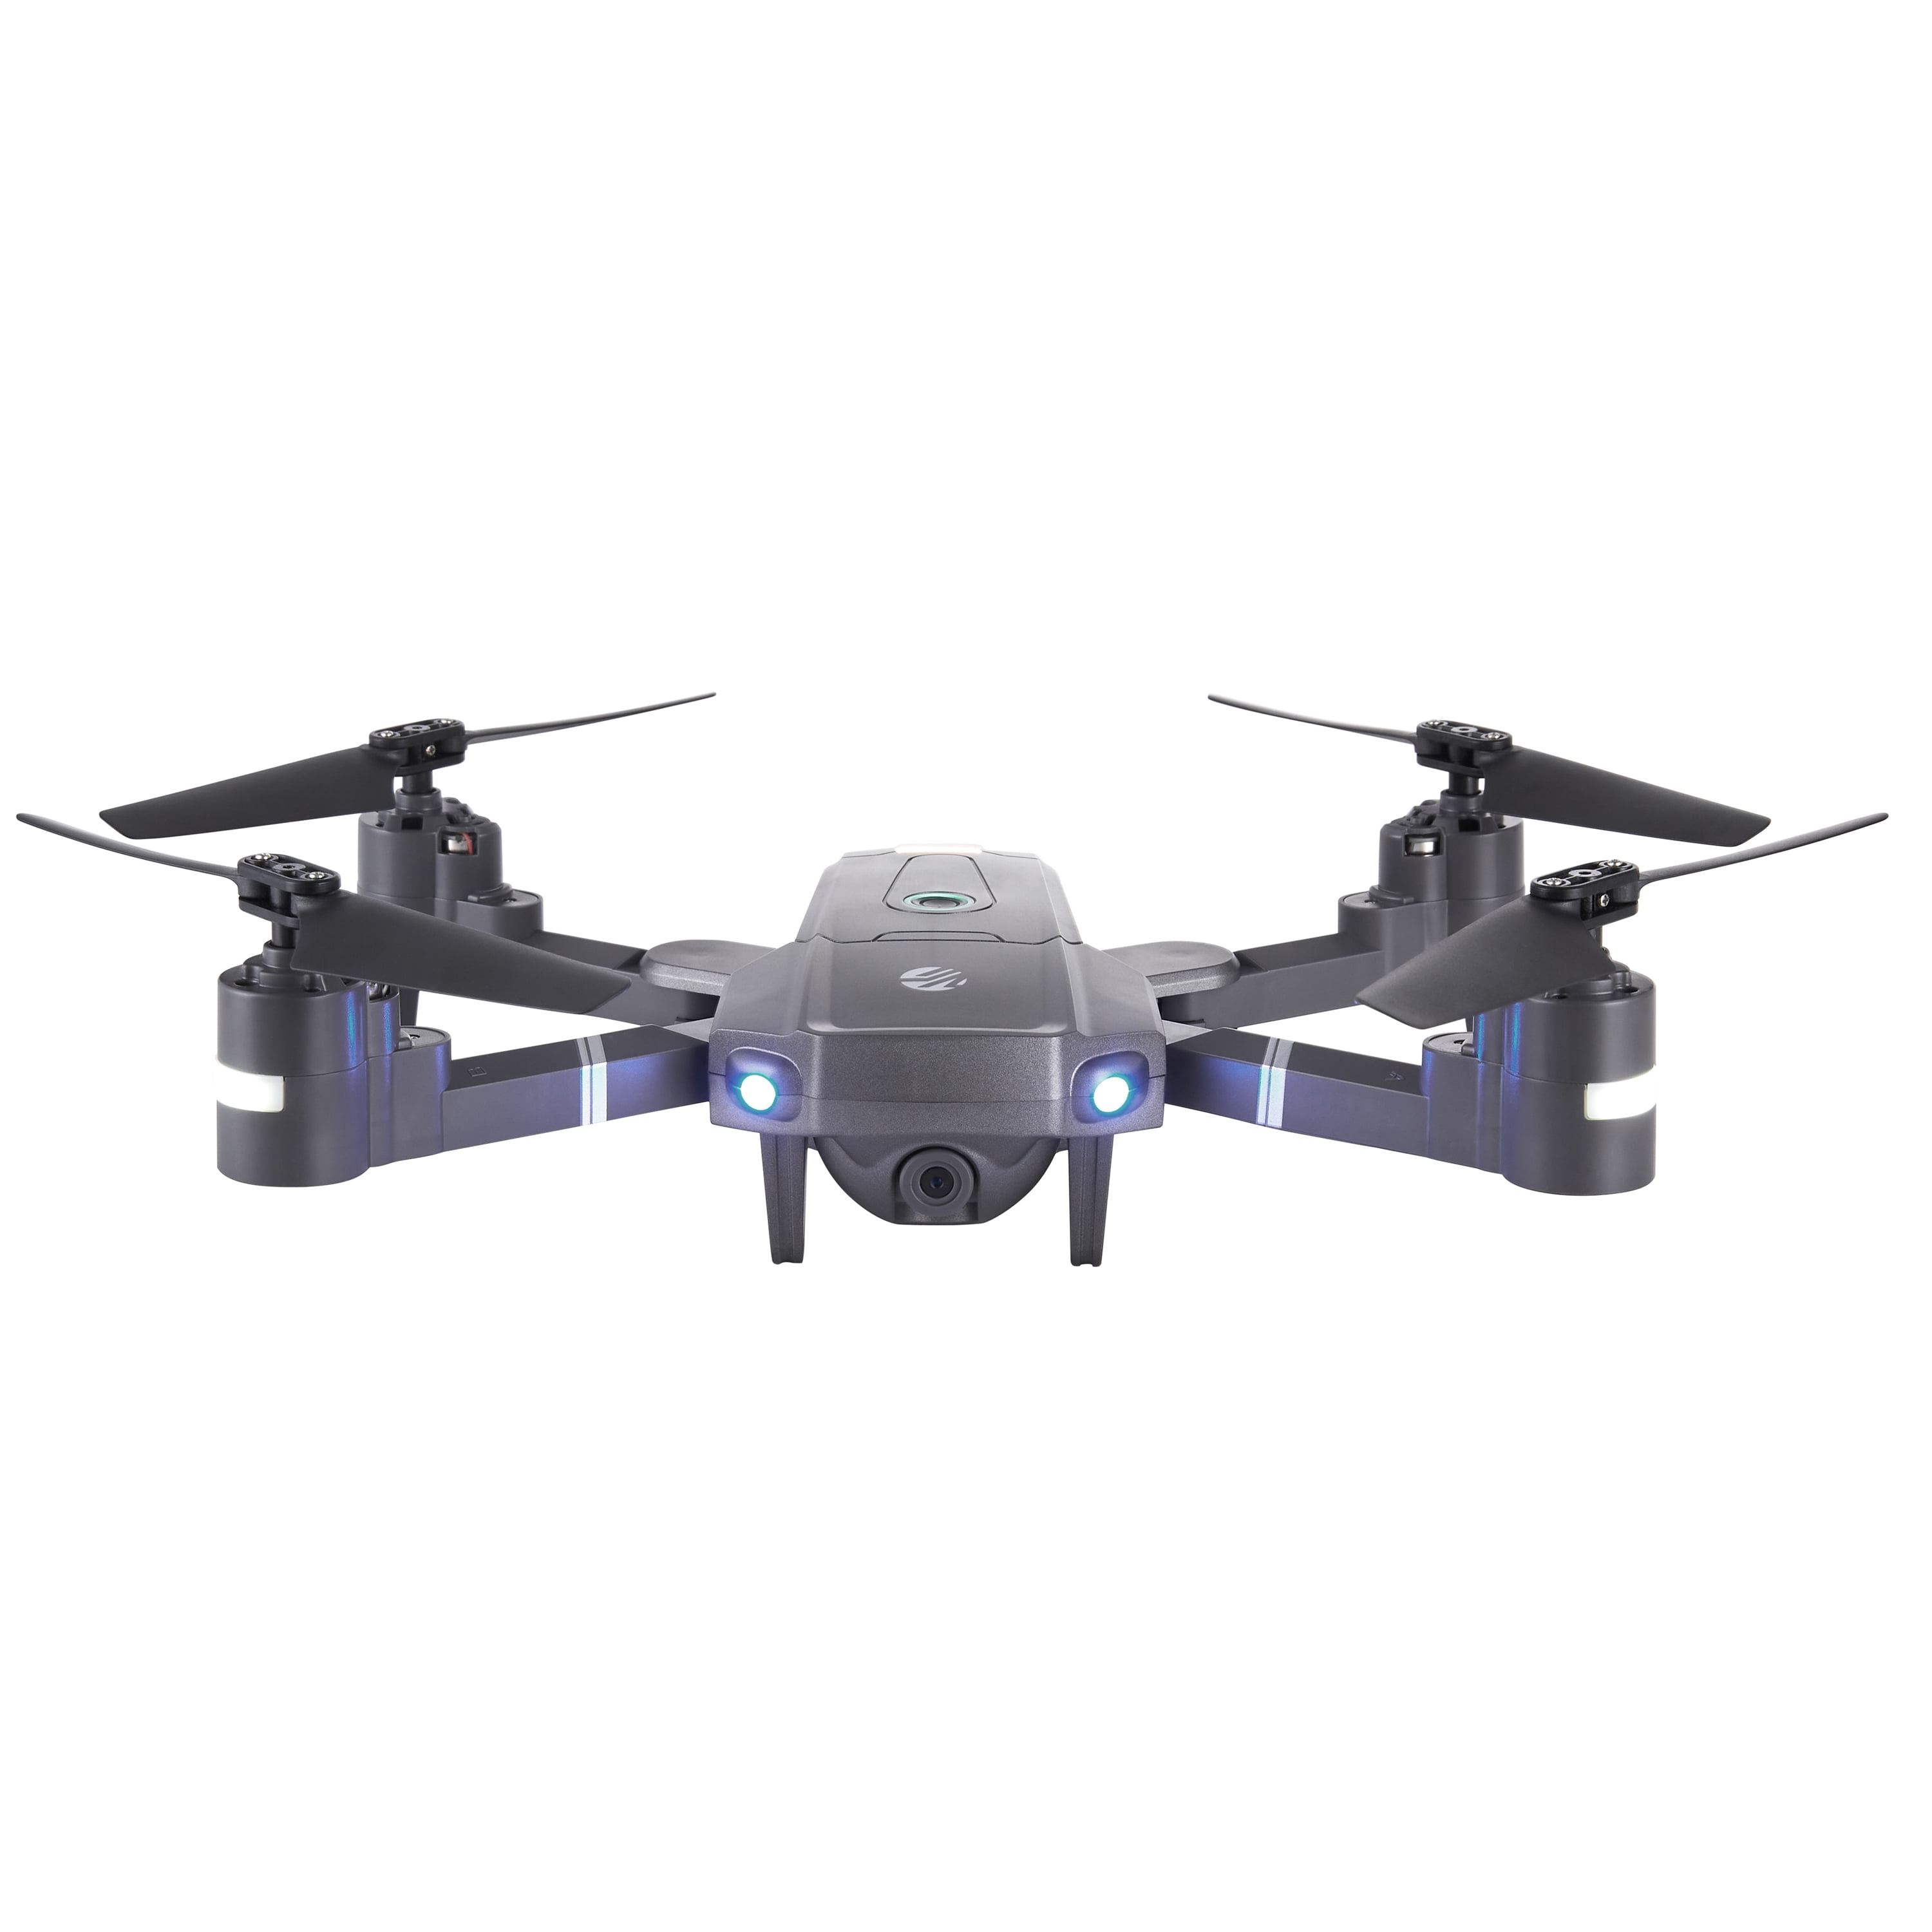 WowWee 4447 Lumi Gaming 8.25 Quadcopter Drone for sale online 